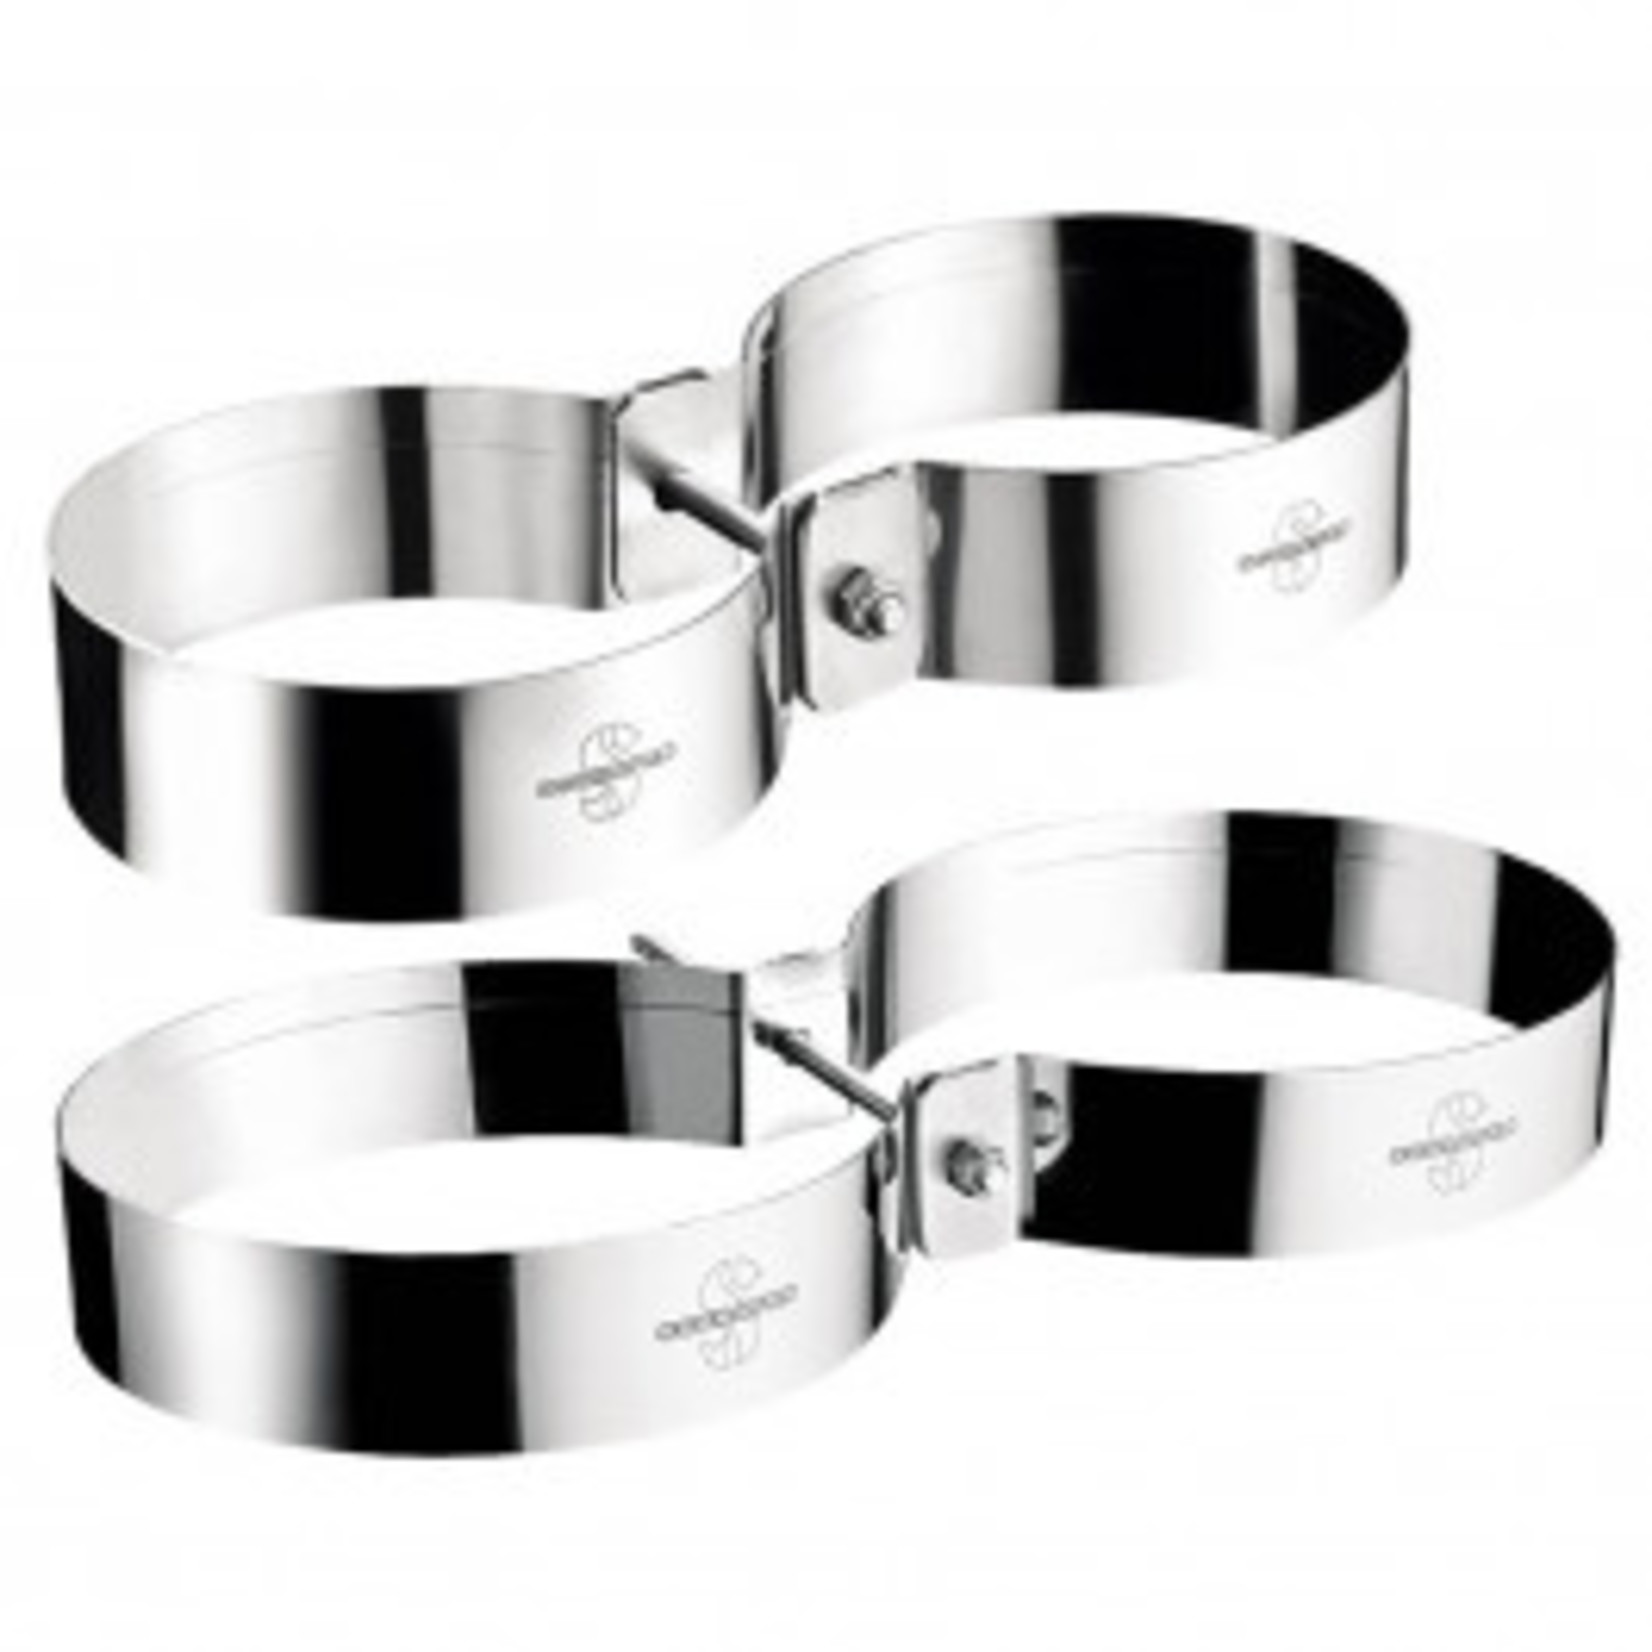 Scubapro STAINLESS STEEL BANDS 140mm - 7L